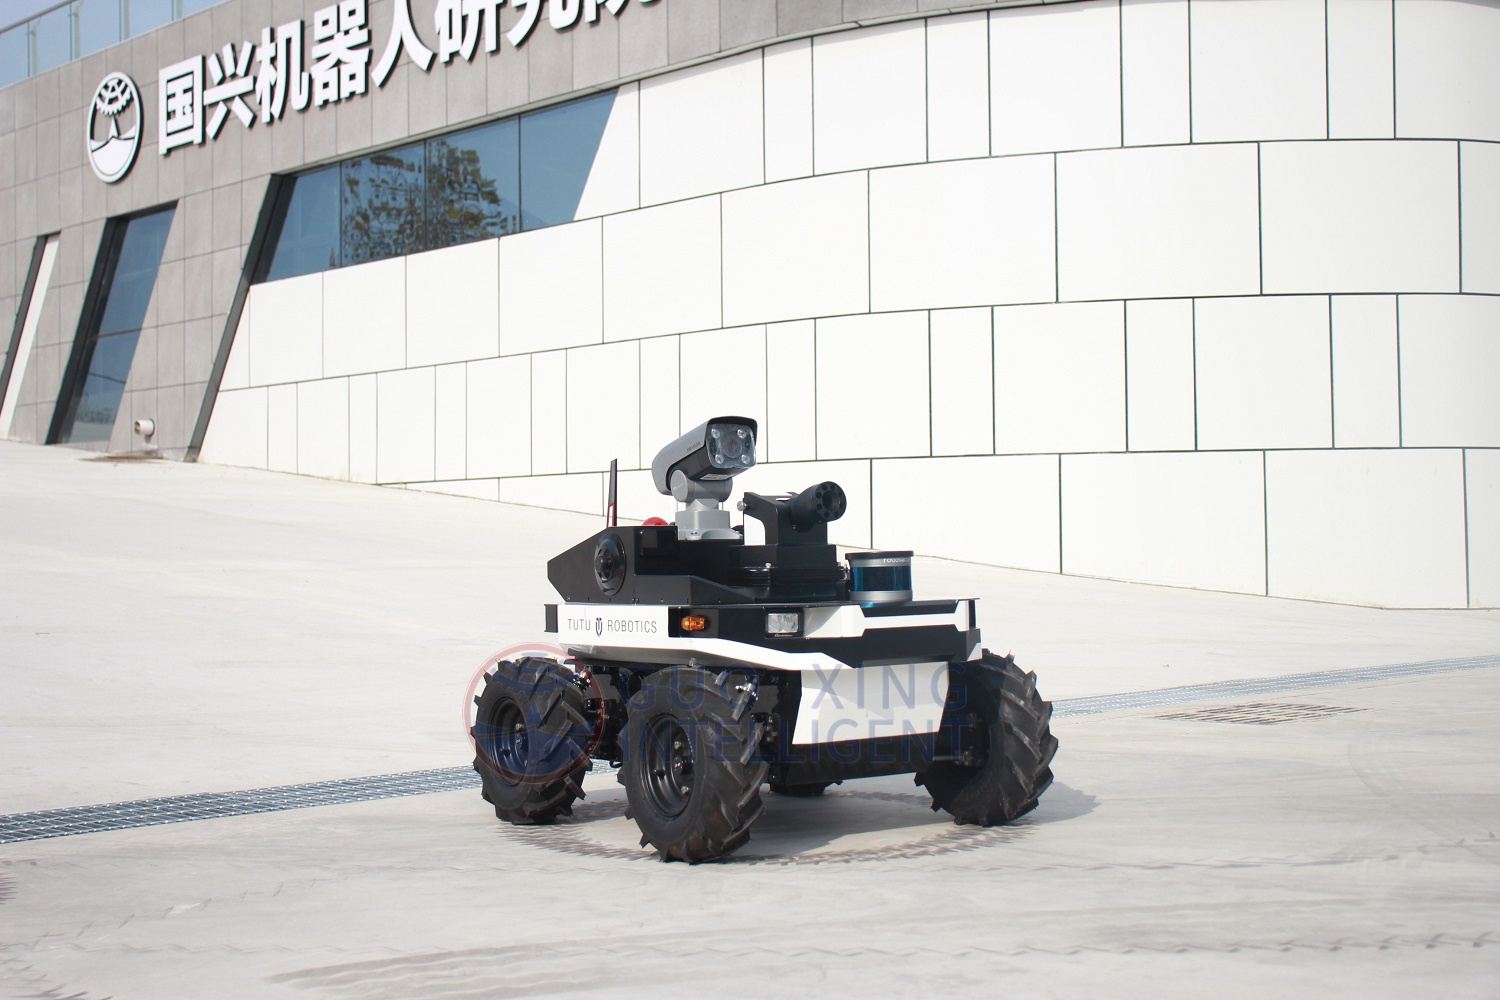 Outdoor Security System Patrol Service Robot WT1000